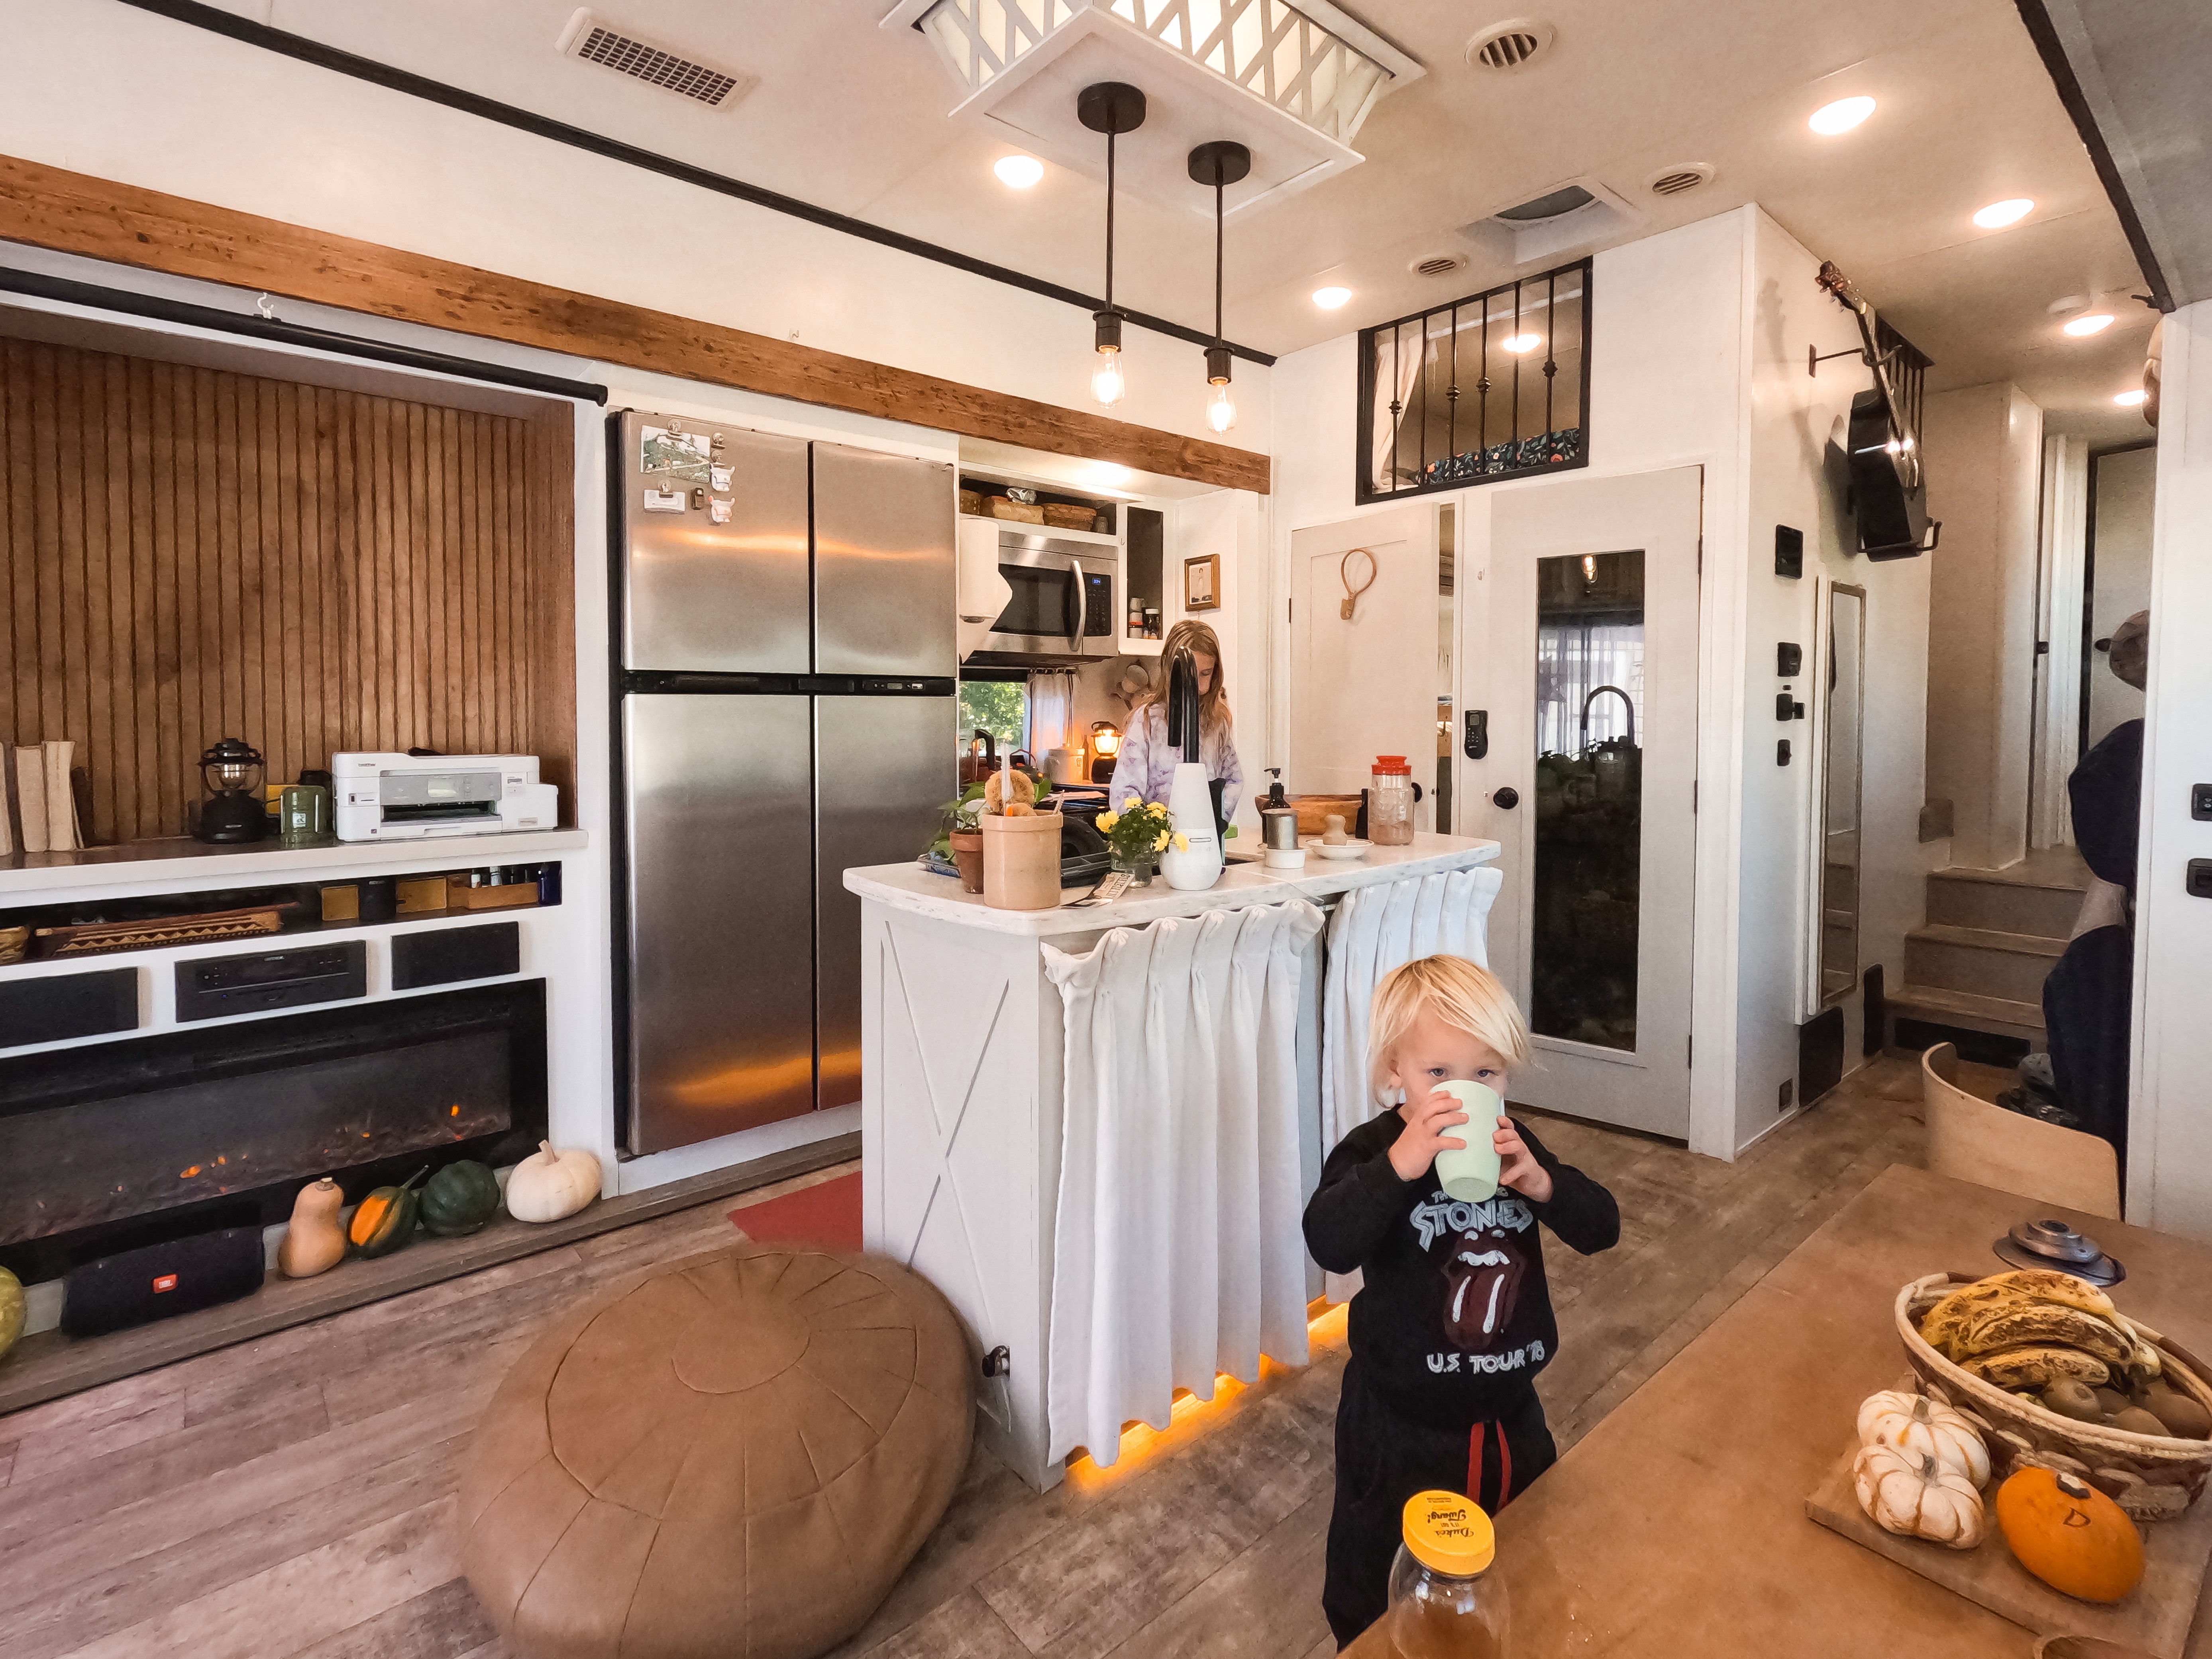 The kitchen and living room of JC and Barbel (Bibi) Barringer's 2018 KZ Durango Gold fifth-wheel